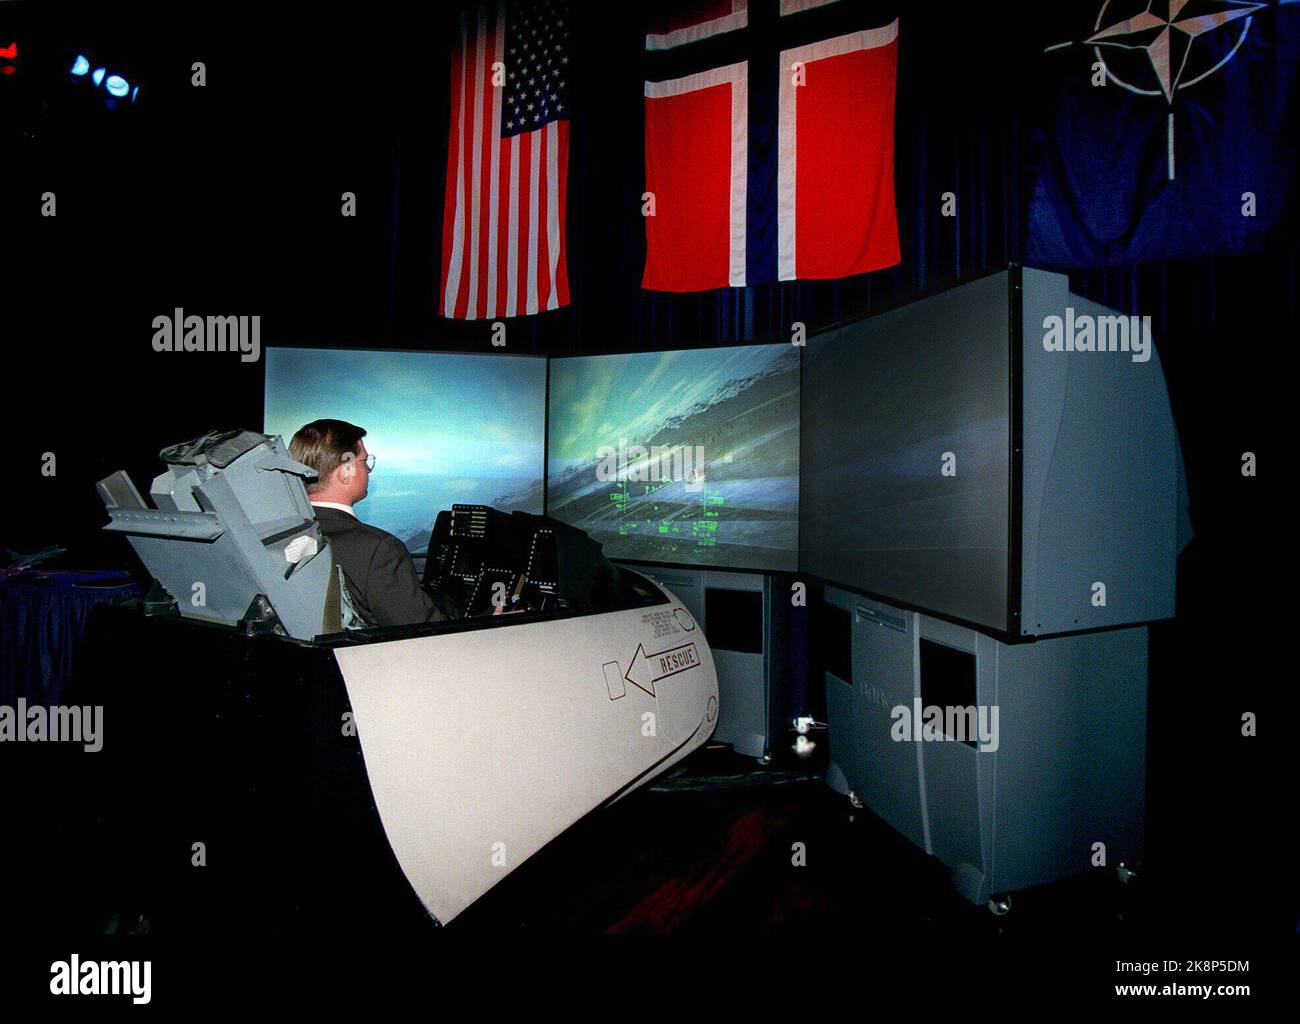 Doug Miller from Lockheed Martin tests the new F-16 Block 50n simulator in the Oslo Concert Hall. The F-16 aircraft type is one of the relevant fighters that Norway assesses when the air defense goes to the purchase of new aircraft. On Thursday, representatives from the Armed Forces and the press received a trial in the simulator. The F-16 conducted its first trial in 1978, and Norway was one of the first countries to buy the fighter jet. Today, 21 countries have acquired the F-16 for their air defense. (Photo: Roar Vestad, NTB Plus) Stock Photo